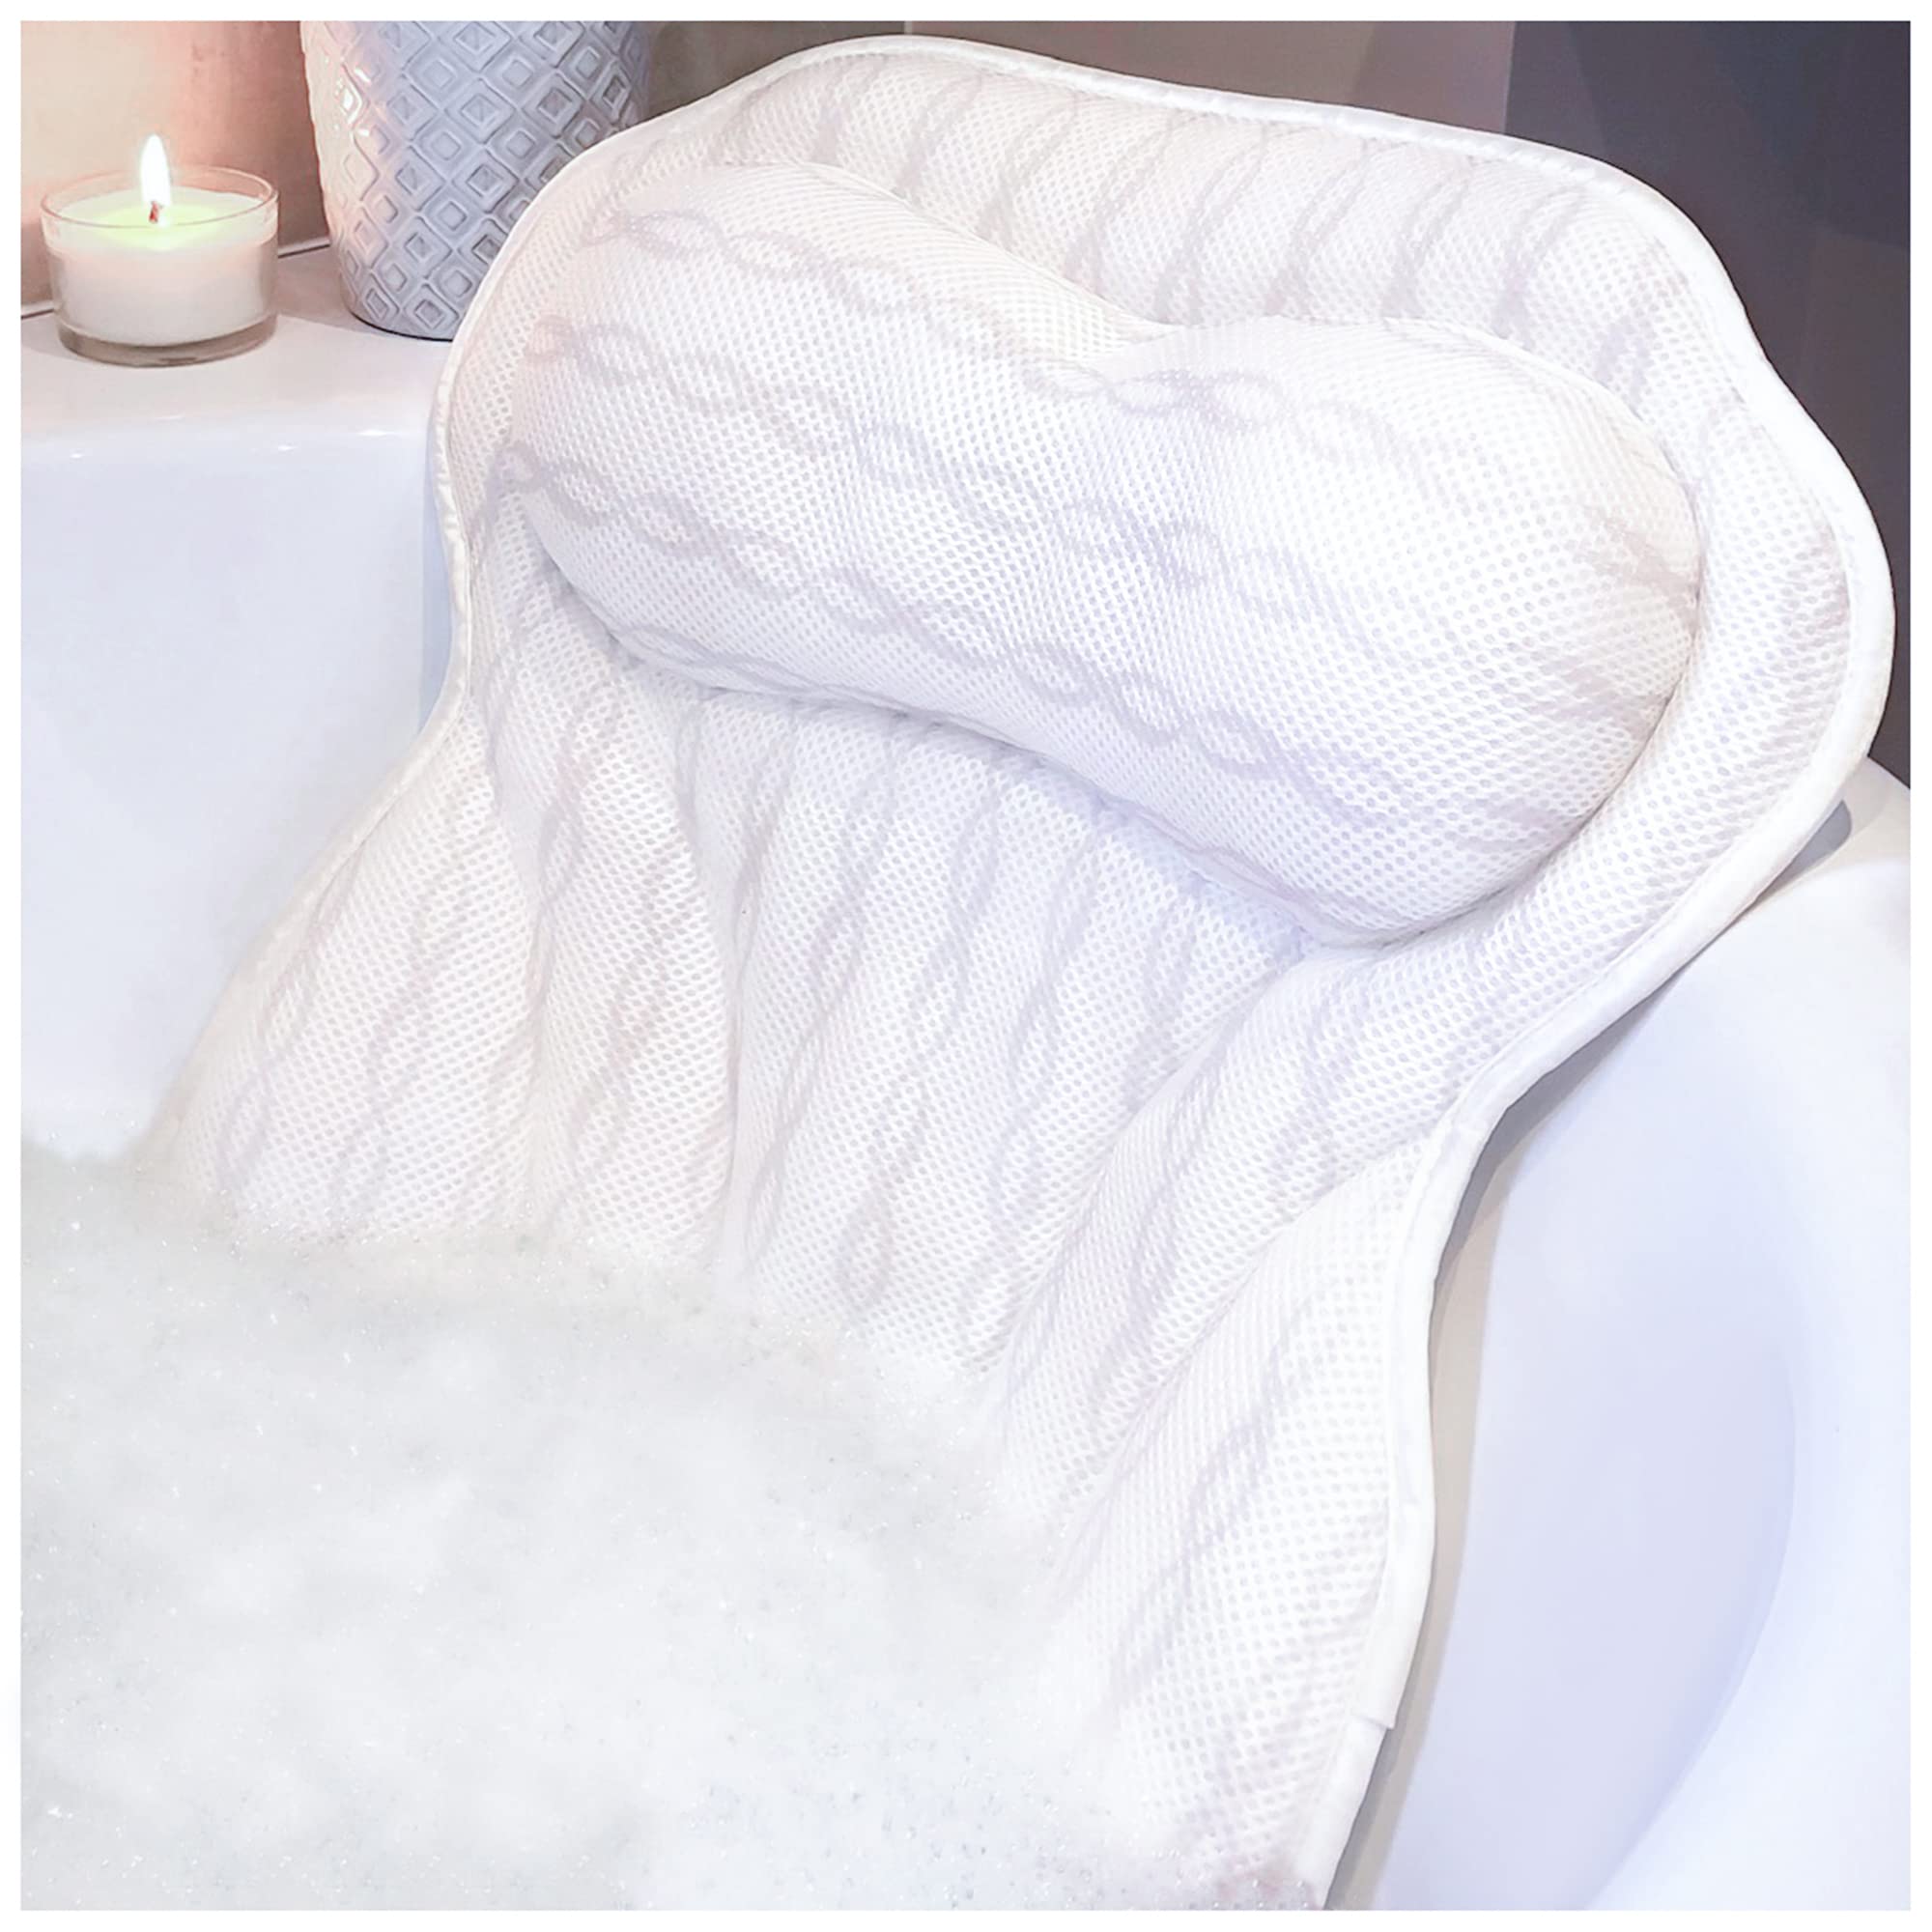 Dropship Ergonomic Body Bath Pillow For Tub - Neck And Back Support - Adult Bath  Tub Pillow With Headrest Cushion to Sell Online at a Lower Price